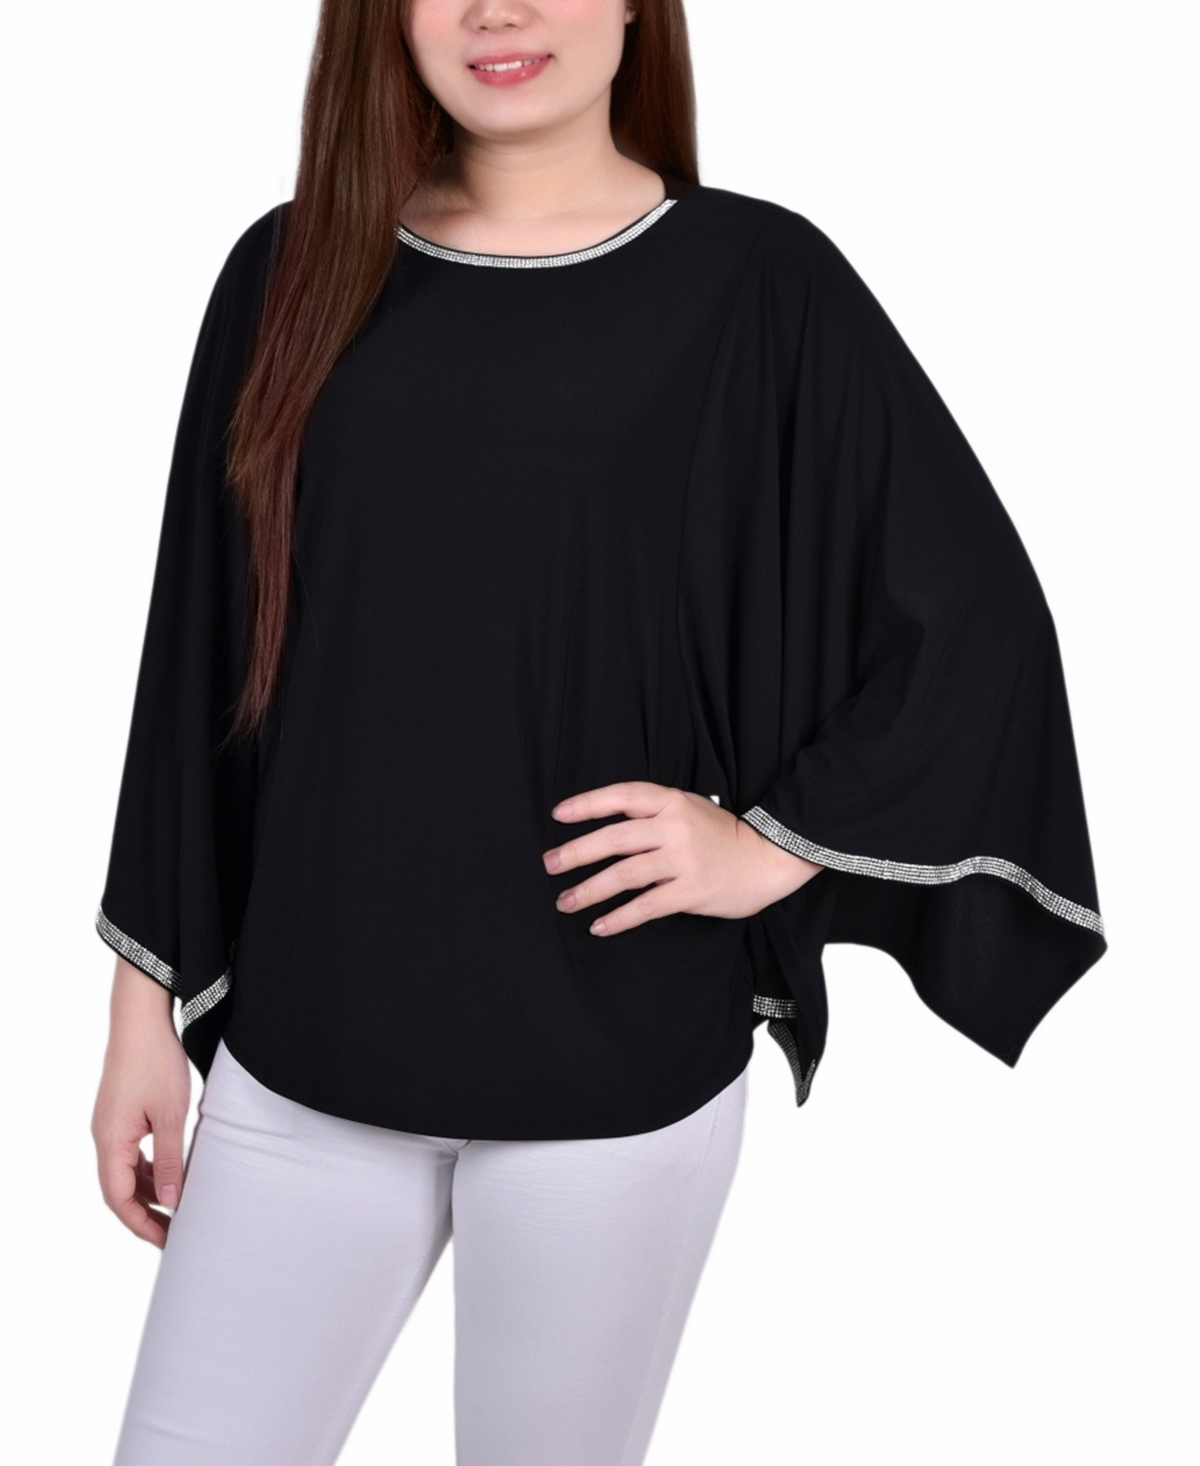 Ny Collection Petite Size Long Batwing Top With Glitz Tape At Neckline And Sleeves In Black